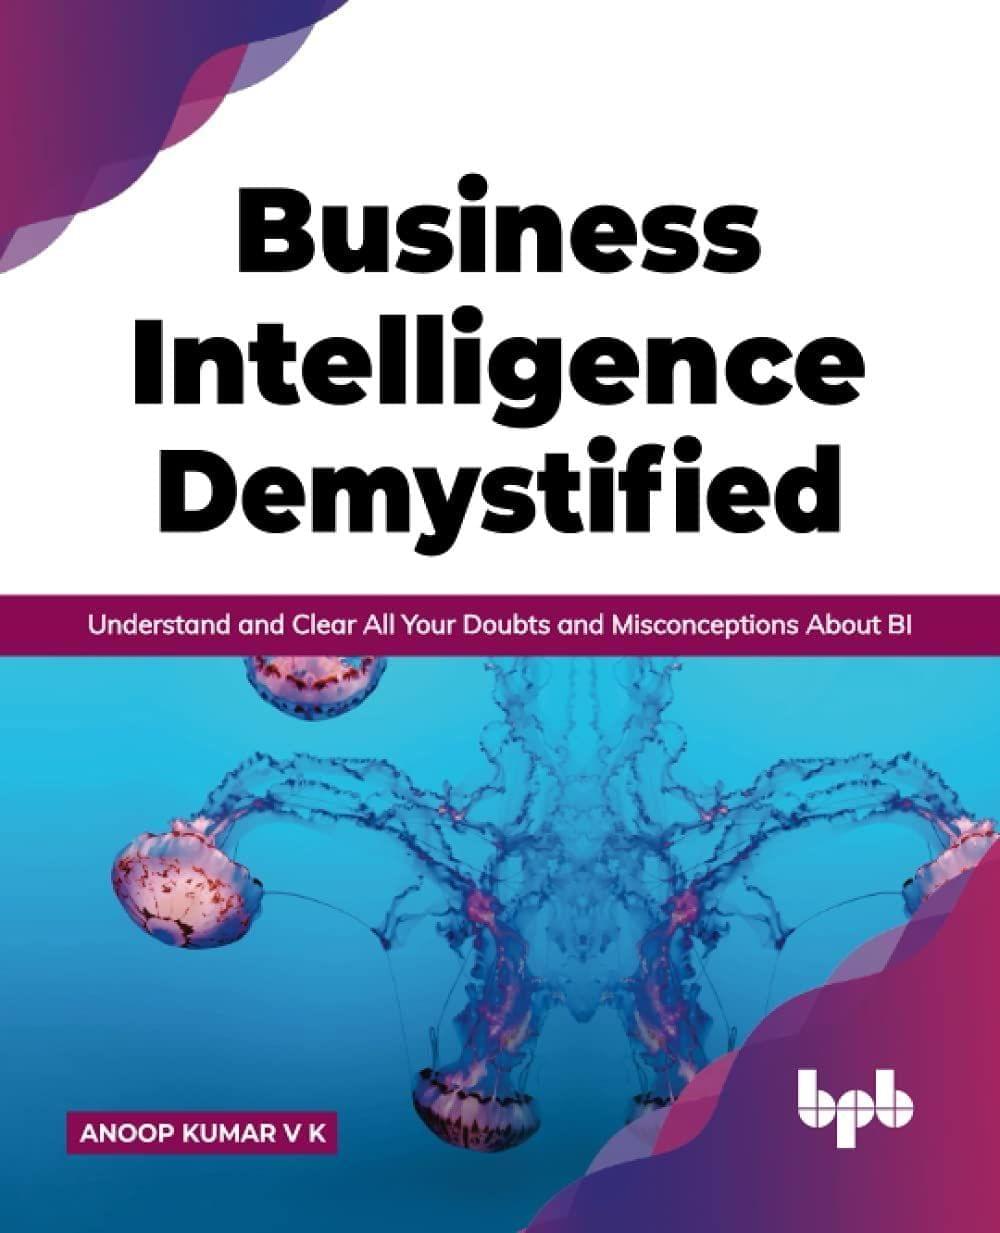 Business Intelligence Demystified: Understand and Clear All Your Doubts and Misconceptions About BI [Paperback] Kumar, Anoop V K